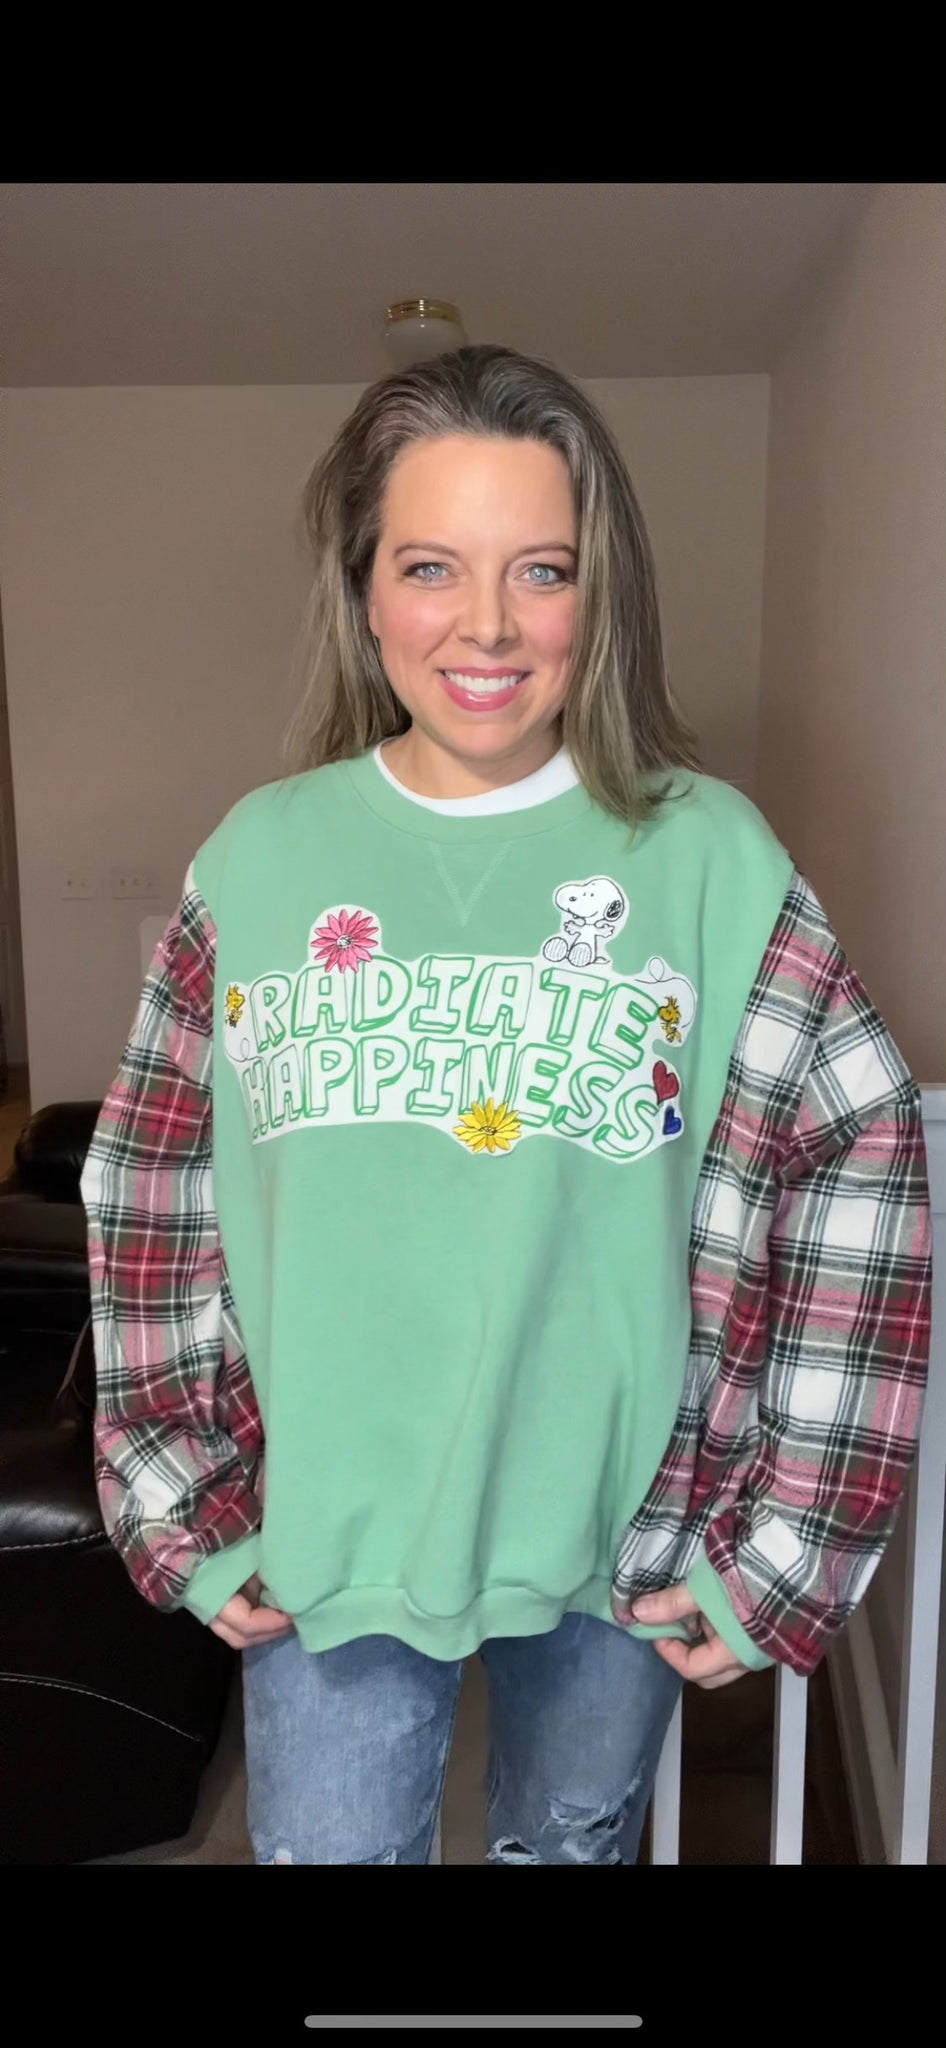 Upcycled Happiness – women’s 1X/2X – midweight sweatshirt with thick flannel sleeves – wide, but shorter￼